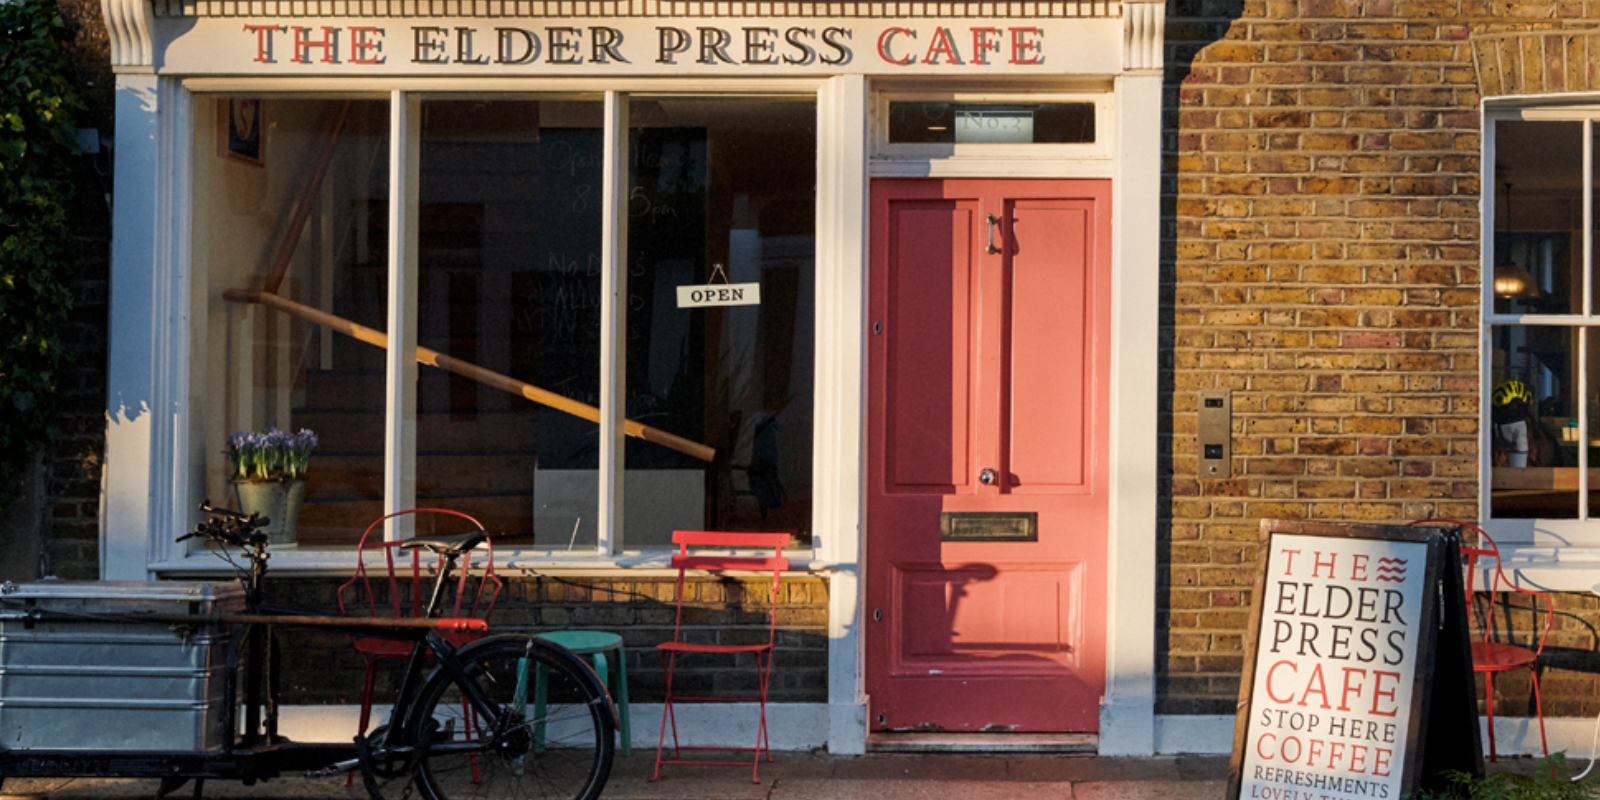 A tale from besides the Thames - our work for The Elder Press Cafe